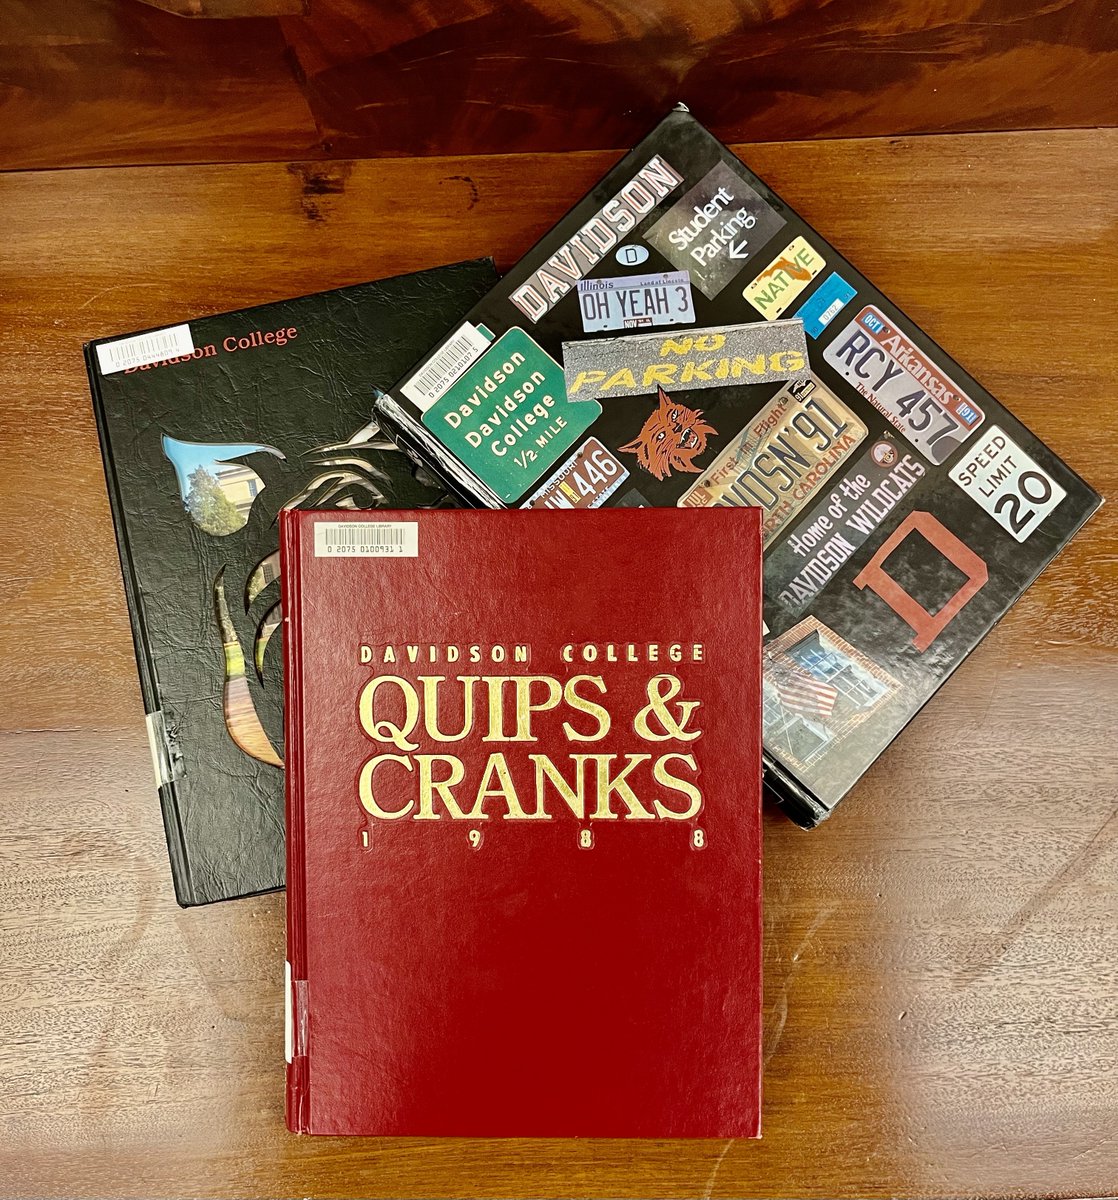 It's Reunion Weekend, Wildcats! Davidson College alums, stop by E.H. Little Library this weekend to revisit the spots where you used to hit the books and browse through the 'Quips and Cranks' from your time at @DavidsonCollege! #DavidsonReunion